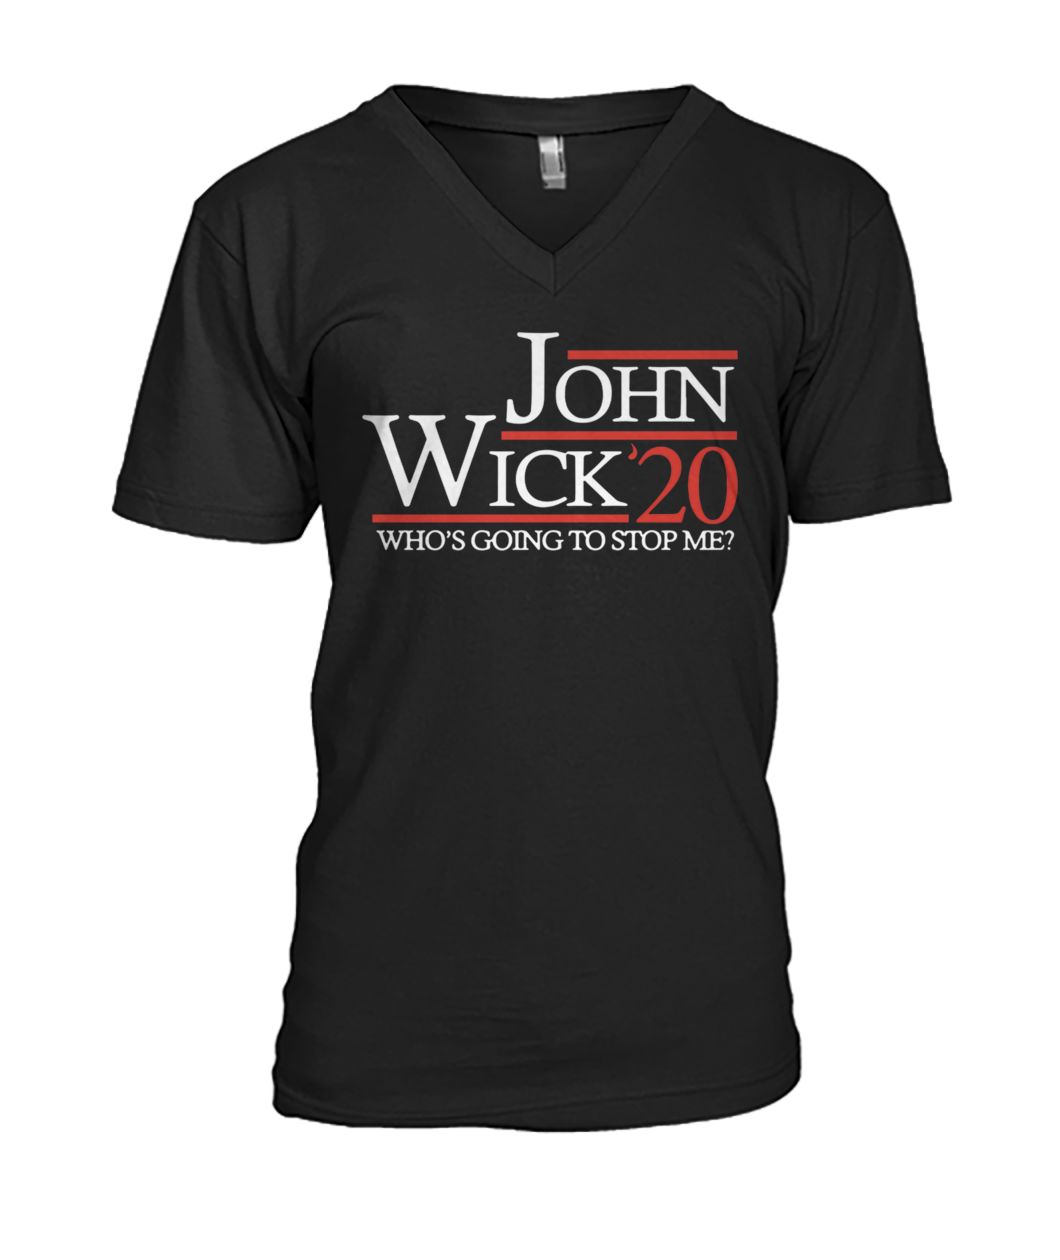 John wick 20 who's going to stop me mens v-neck